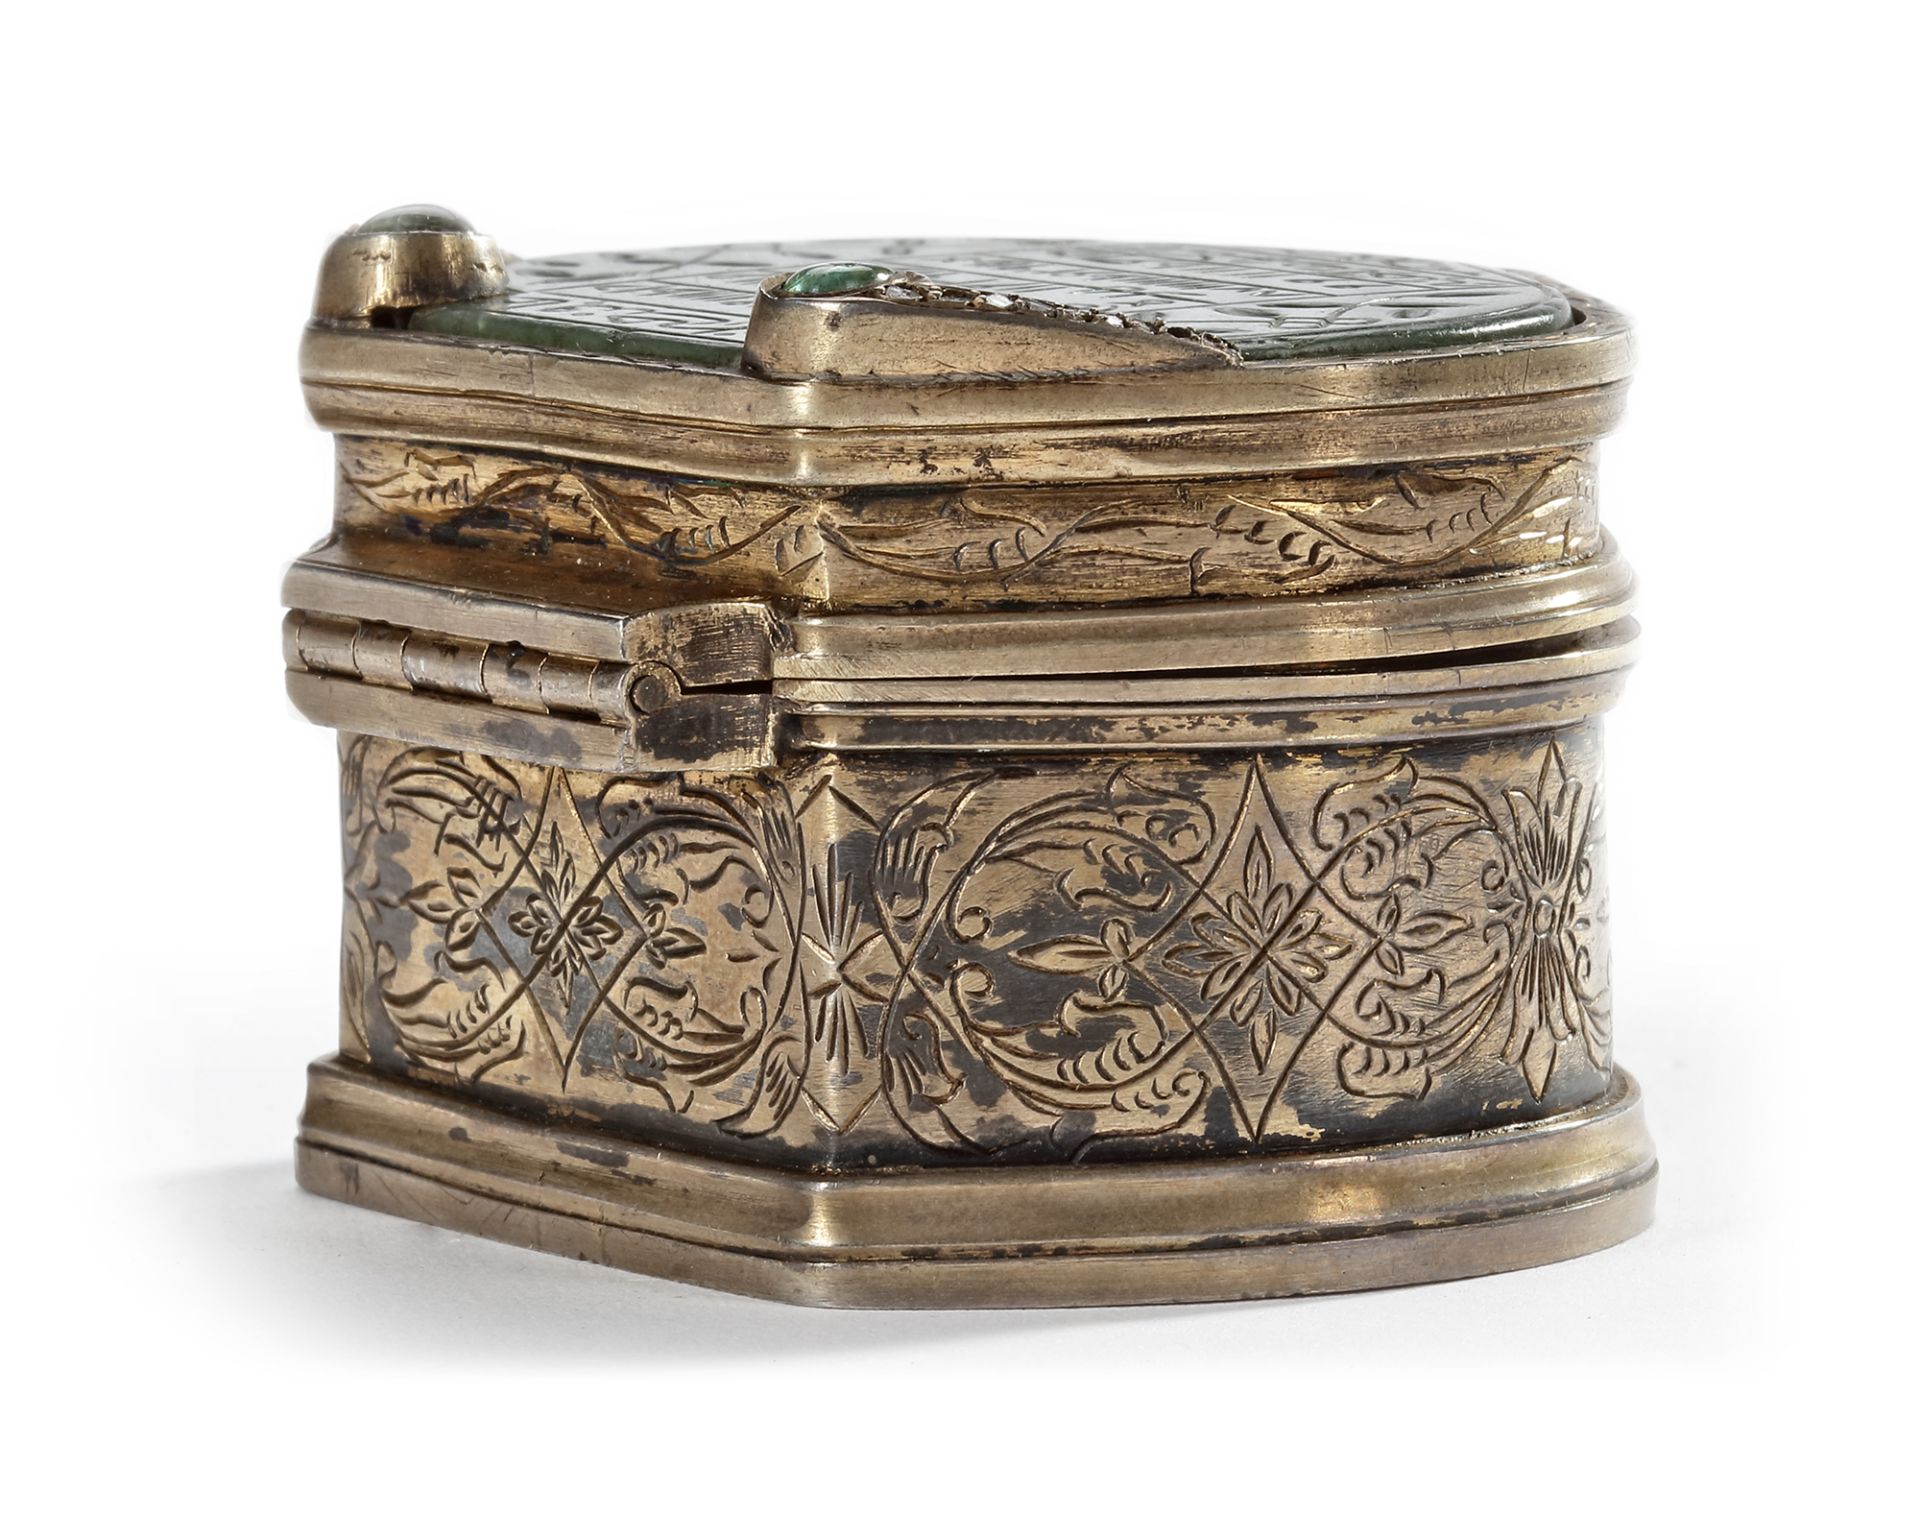 AN OTTOMAN JADE AND GEM-SET SILVER PLATED CASKET, 16TH CENTURY - Image 6 of 12